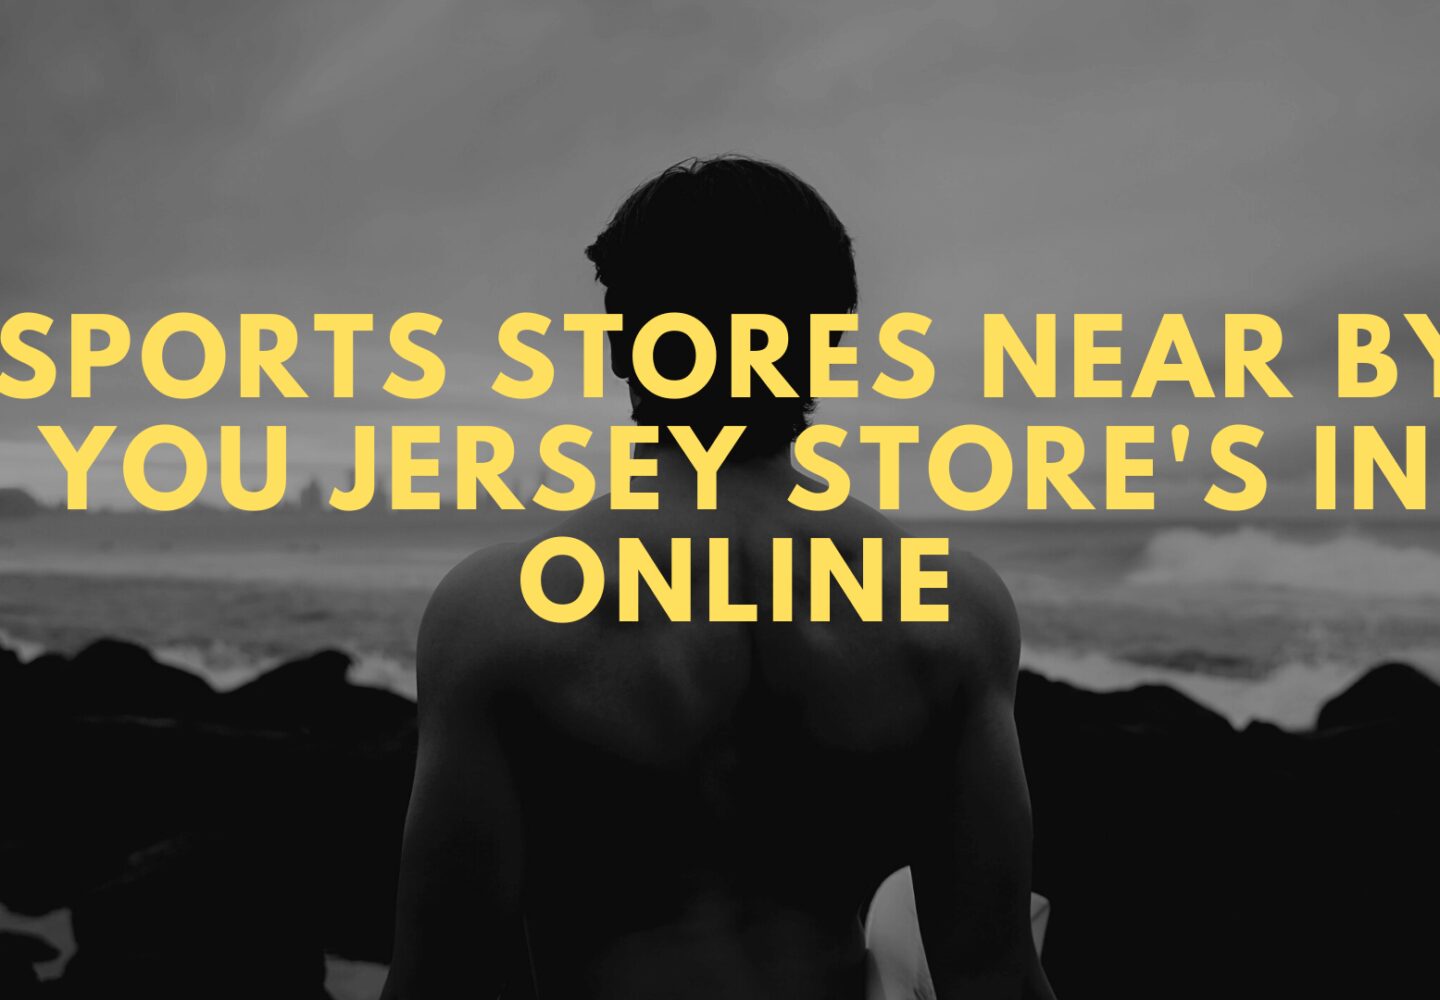 #3. how choose best sports stores near me for jersey in online